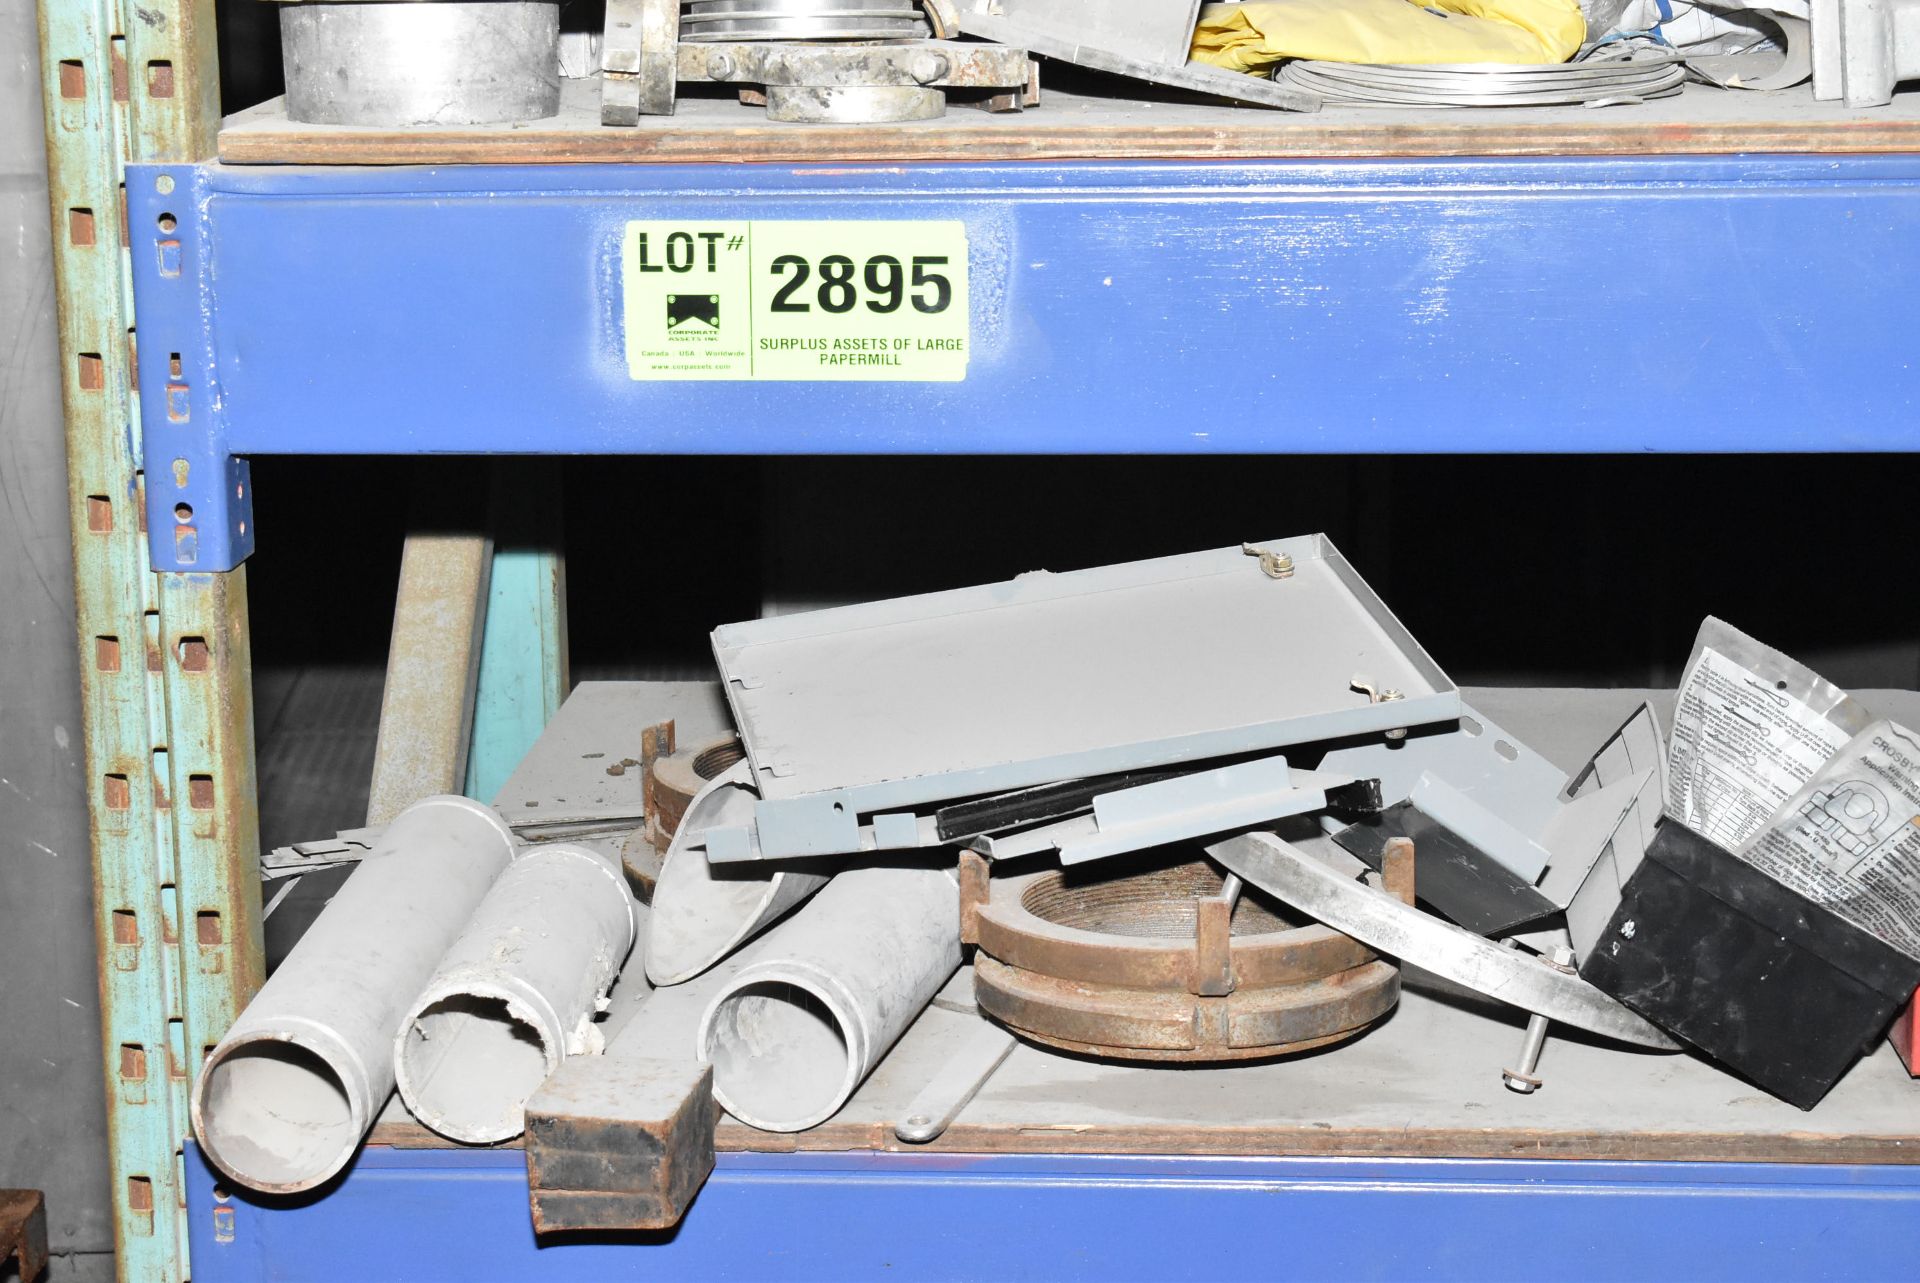 LOT/ SECTION OF PALLET RACK WITH CONTENTS - INCLUDING PUMPS, MOTORS, SPARE PARTS, SHOP SUPPLIES [ - Image 3 of 7